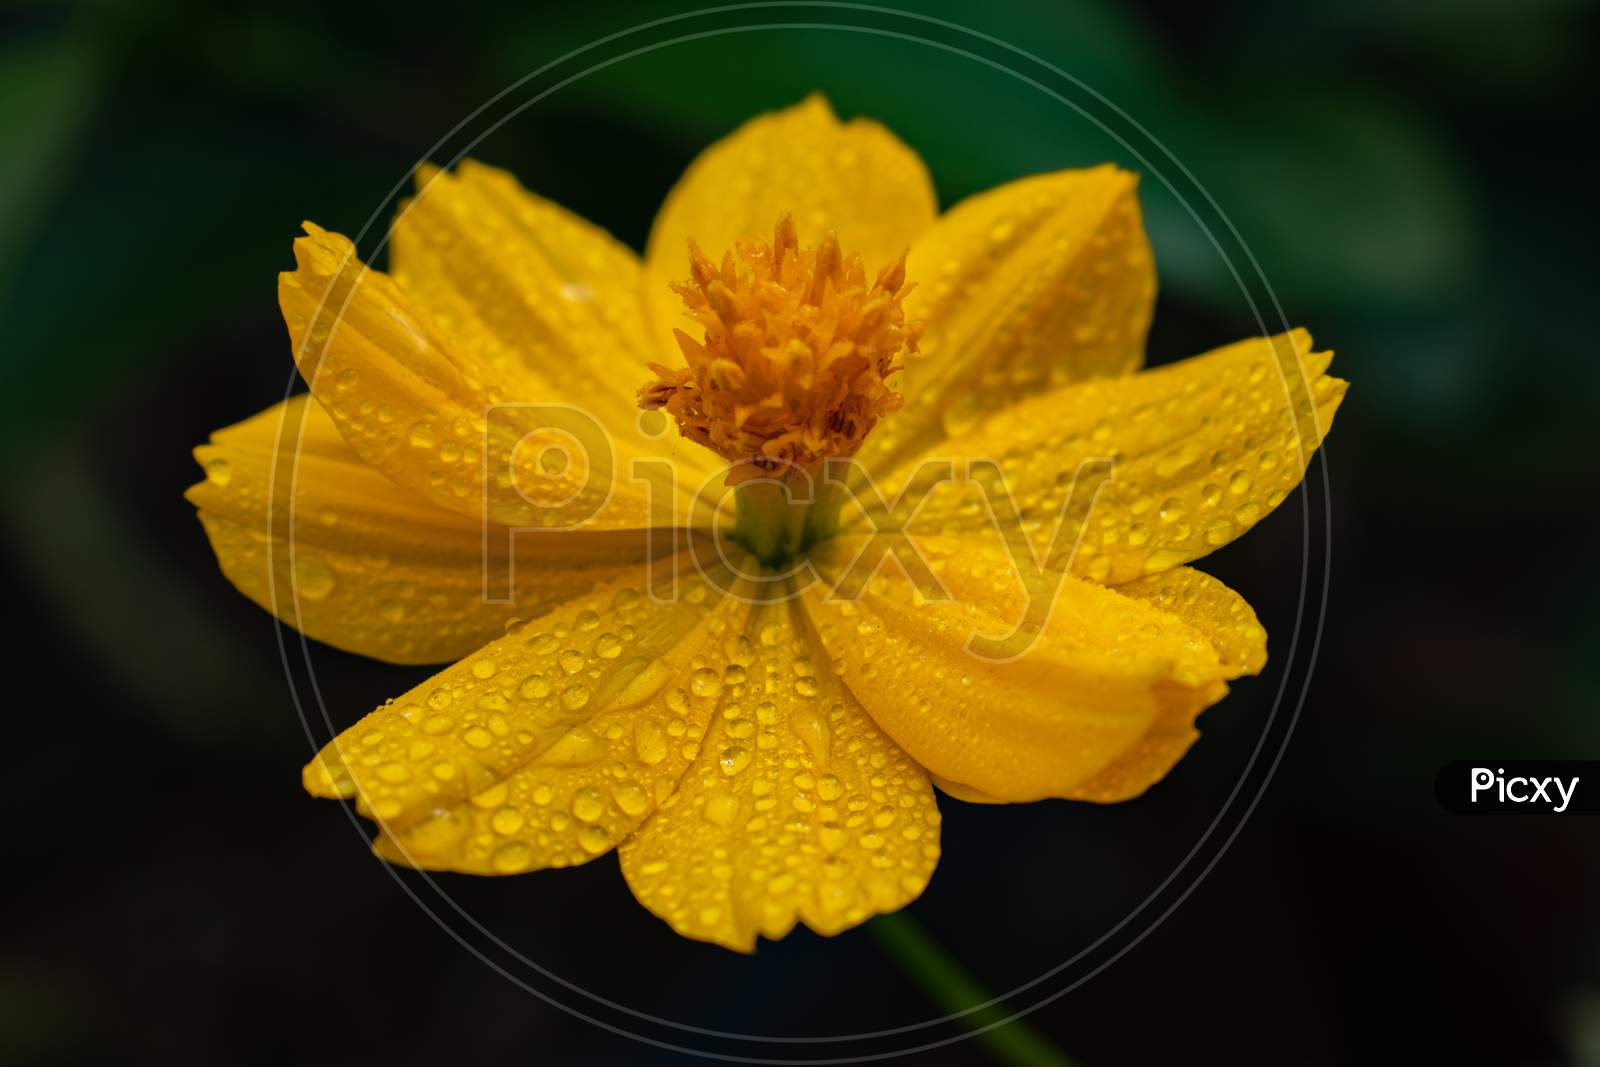 Yellow cosmos flower with water drops on it, India